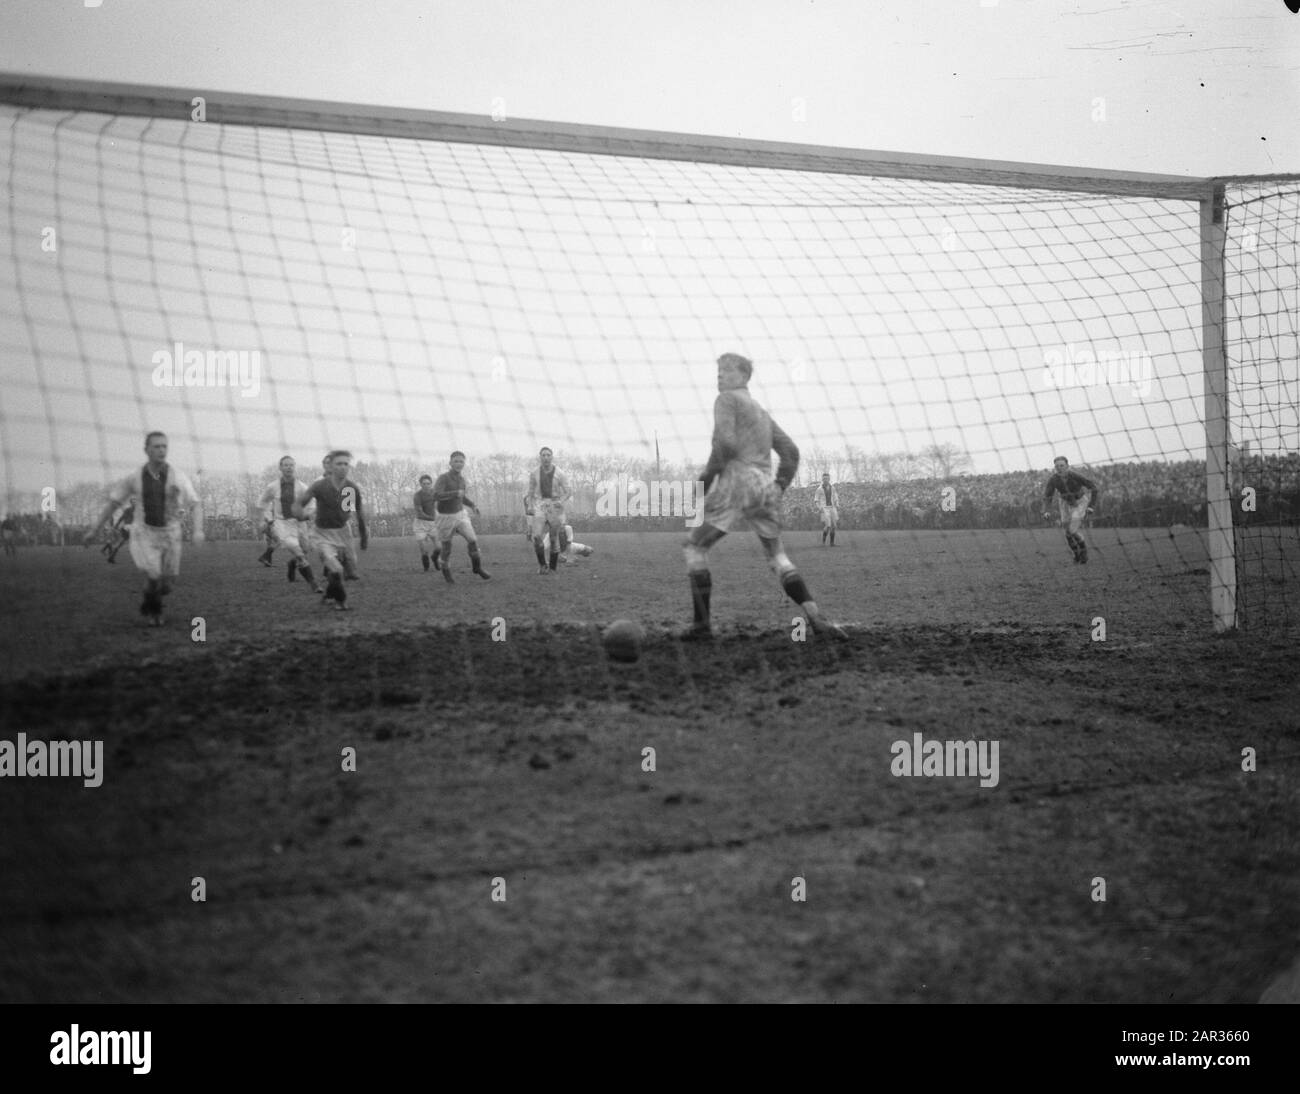 Football. HVC against Ajax 0-3. (HVC-keeper British is passed) Annotation: According to photo administration goalkeeper Jan van Greven of Ajax, but this seems incorrect Date: 16 January 1955 Location: Amersfoort Keywords: goalkeepers, sports, football Institution Name: AJAX Stock Photo